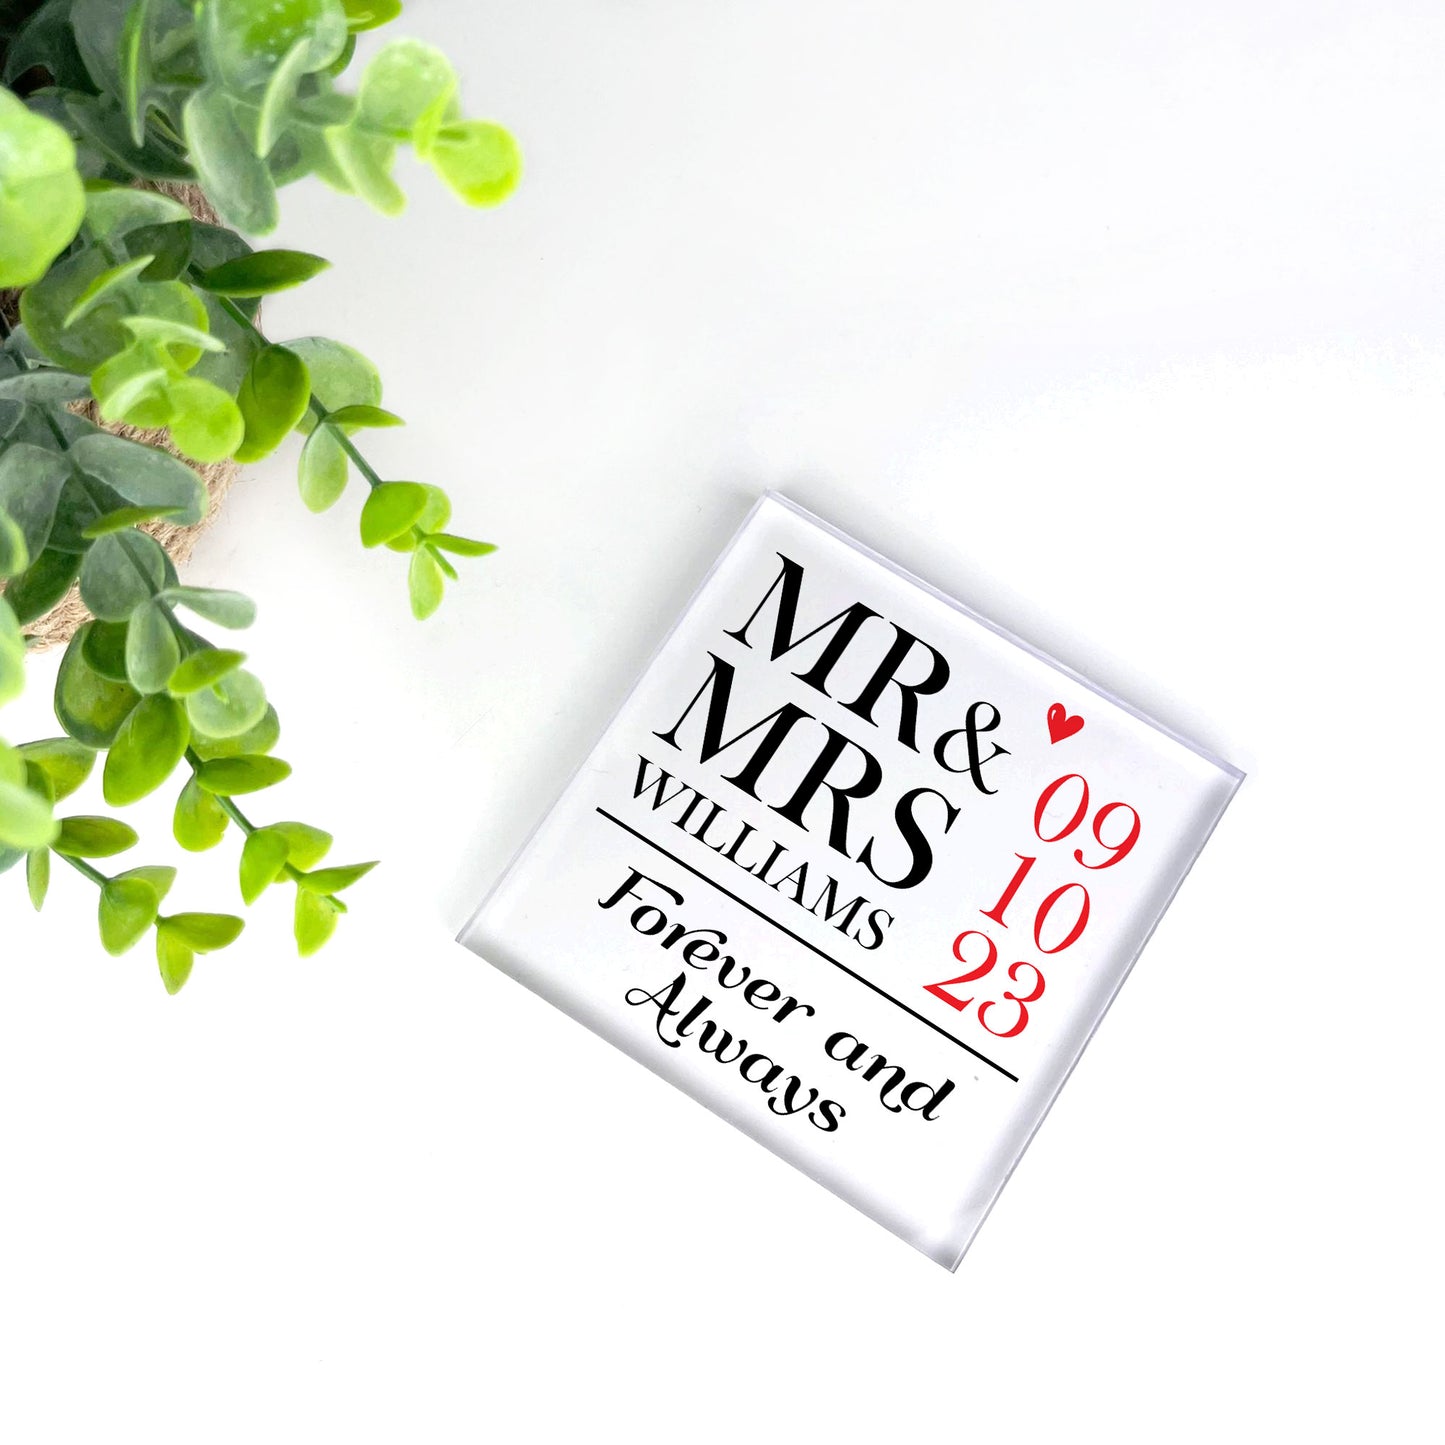 Wedding Day Gifts Personalised Mr And Mrs Gift Acrylic Block